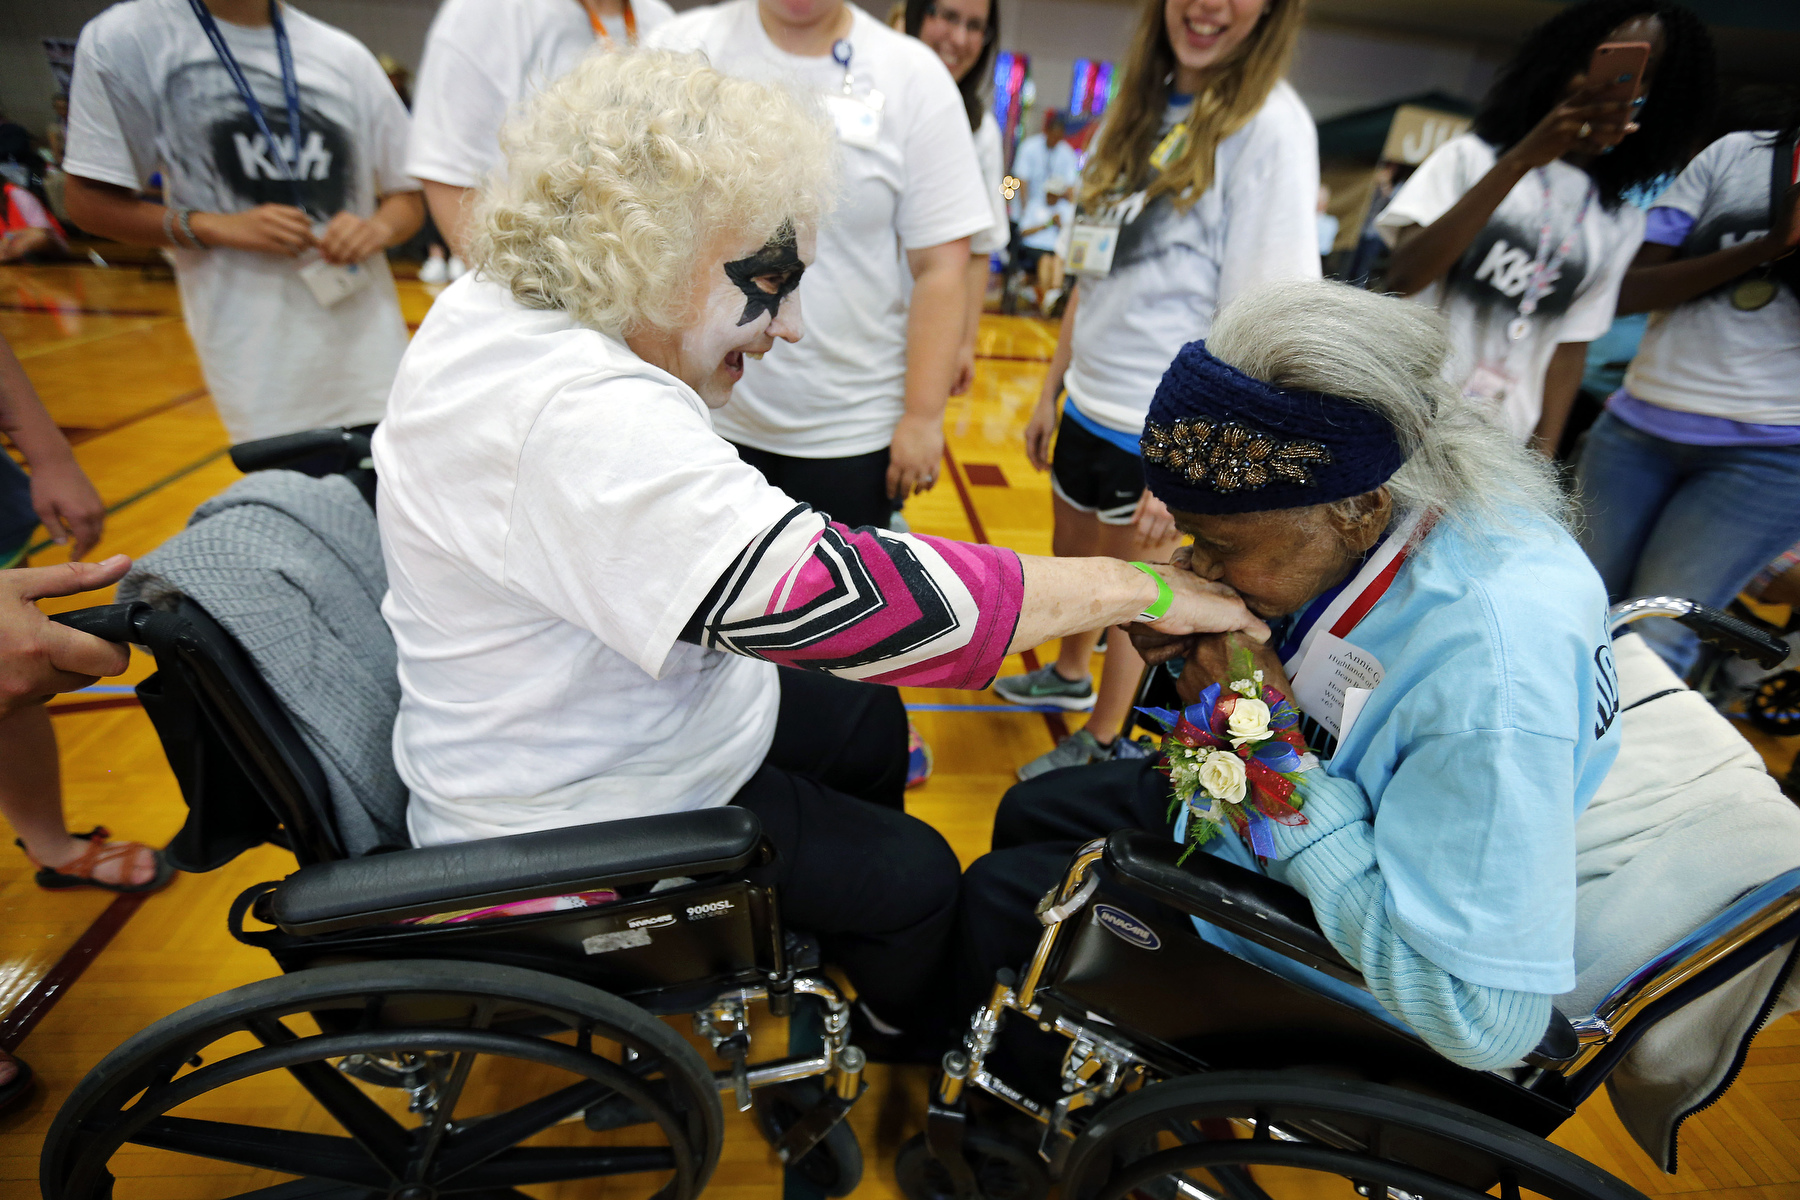 June 21, 2016 - Sue Burns, 87, is congratulated by Annie Green, 103, for her win after the two competed in the over-65 wheelchair race during the annual Nursing Home Olympics hosted by the Tennessee Health Care Association at Bellevue Baptist Church. Nineteen nursing home competed in five different events including darts, horse shoes, bean bag toss, basketball and wheelchair races broken into two age groups. (Mike Brown/The Commercial Appeal)